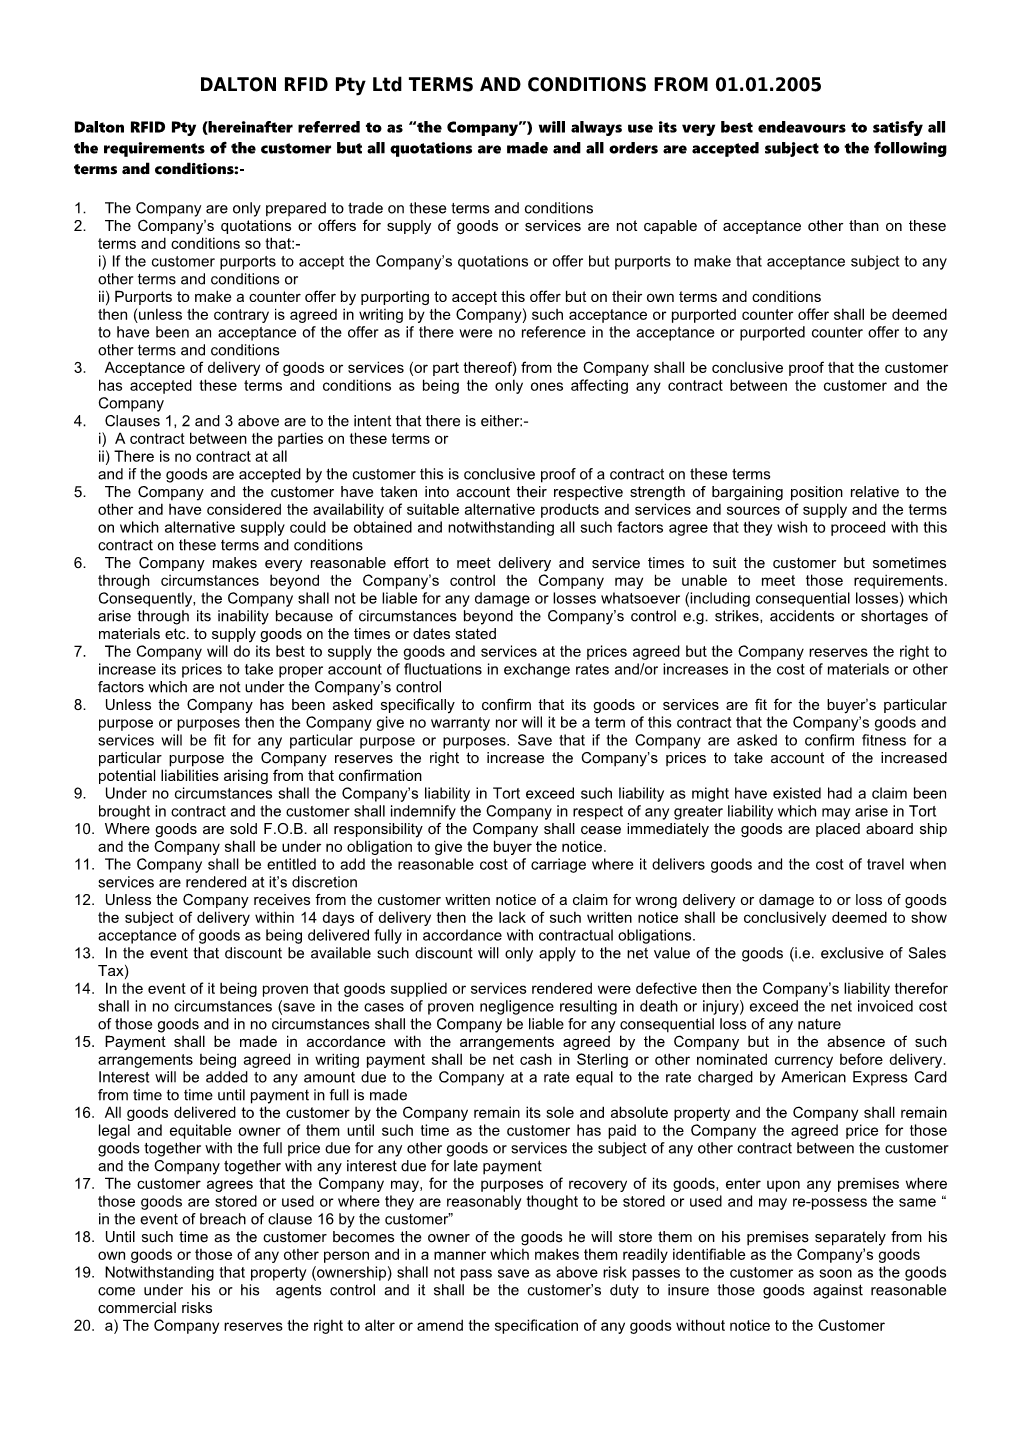 Fearing International (Stock-Aids) Limited Terms and Conditions from 1